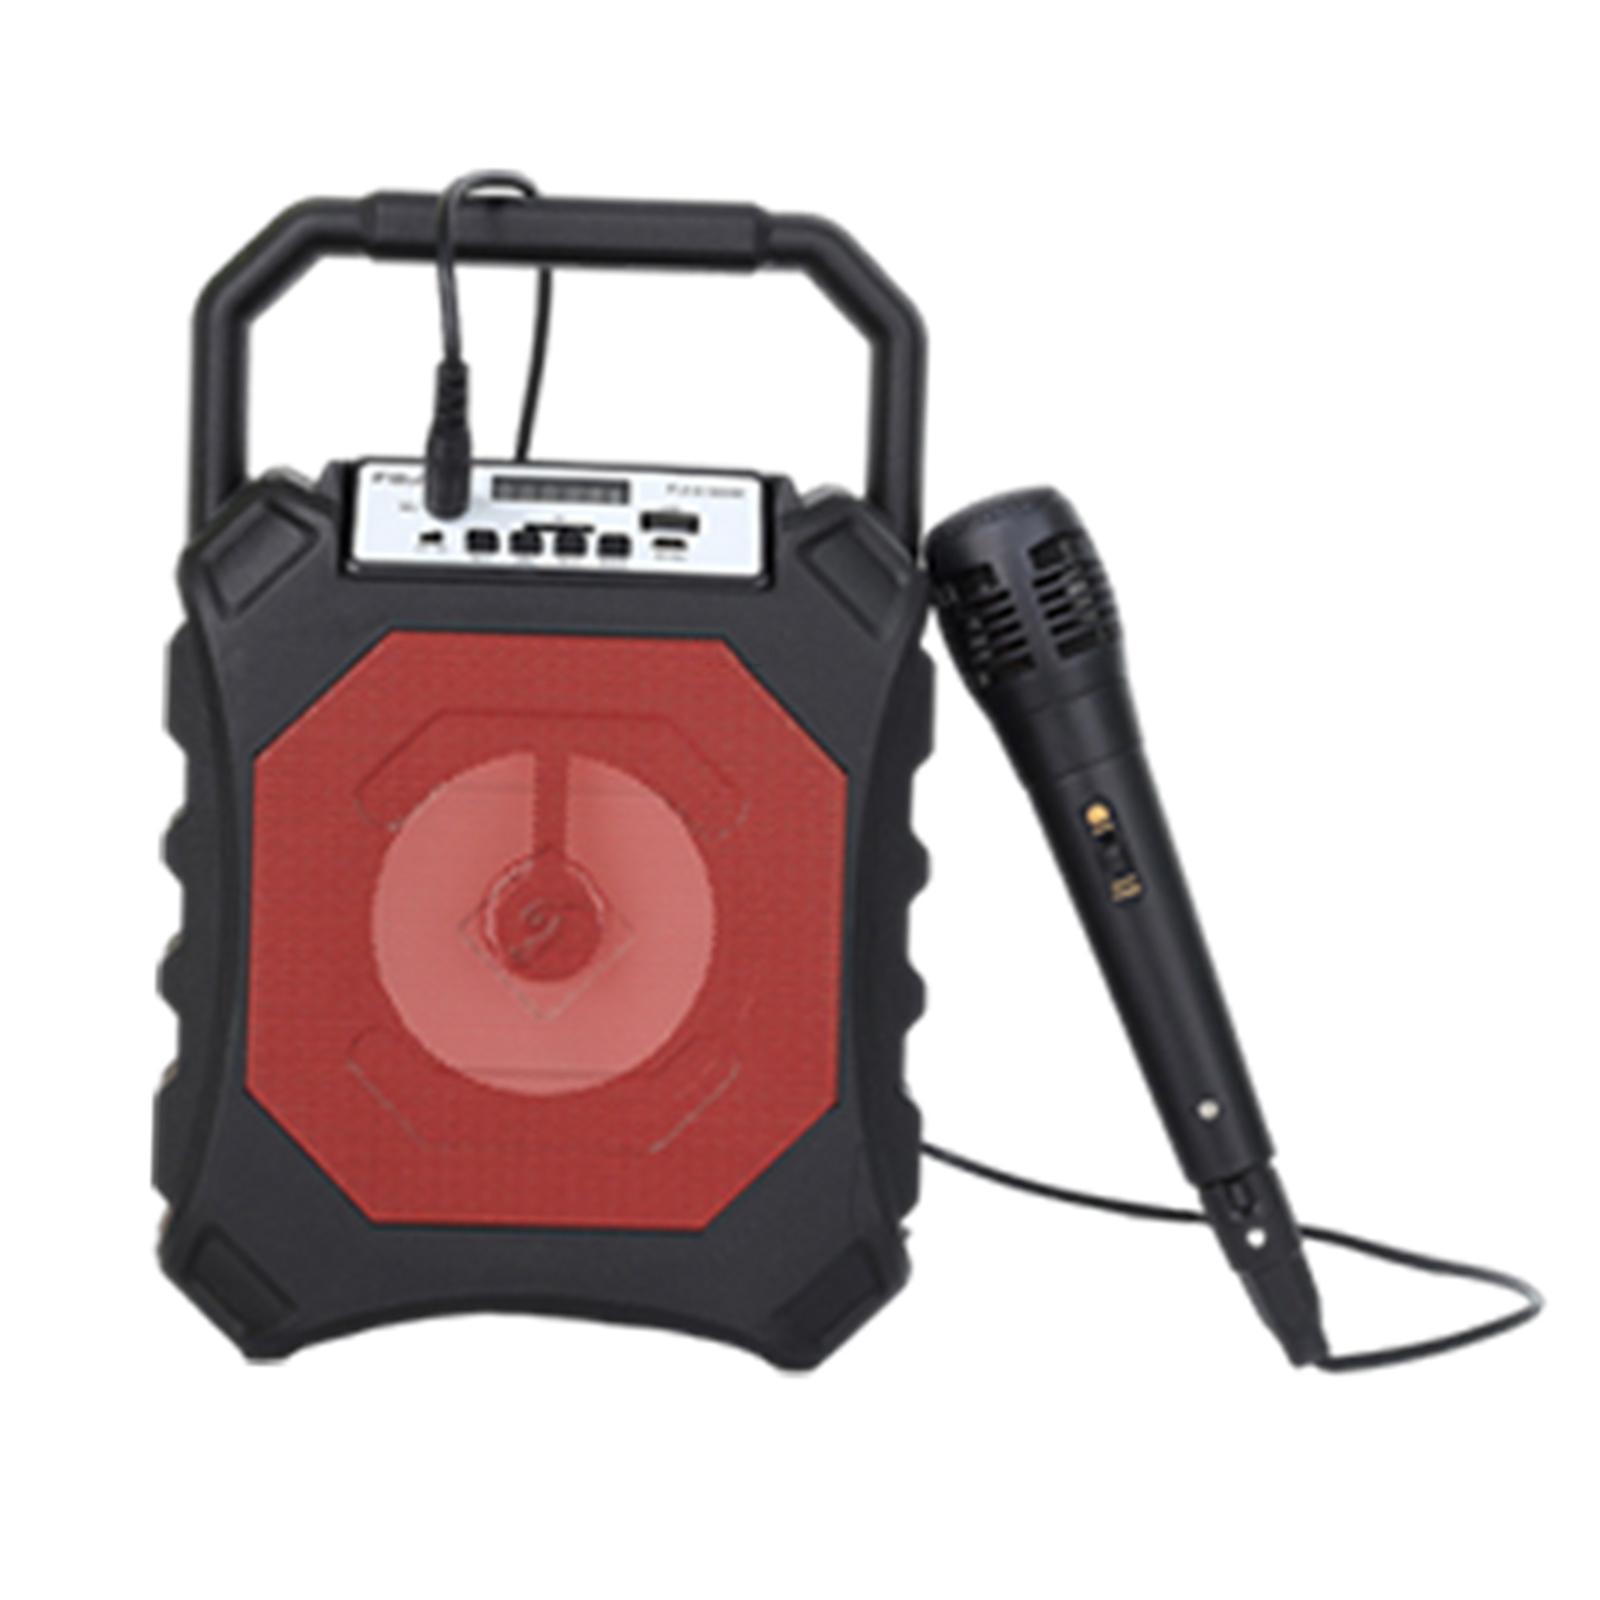 Karaoke Bluetooth Machine Records Singing Speaker for Adults Party Red